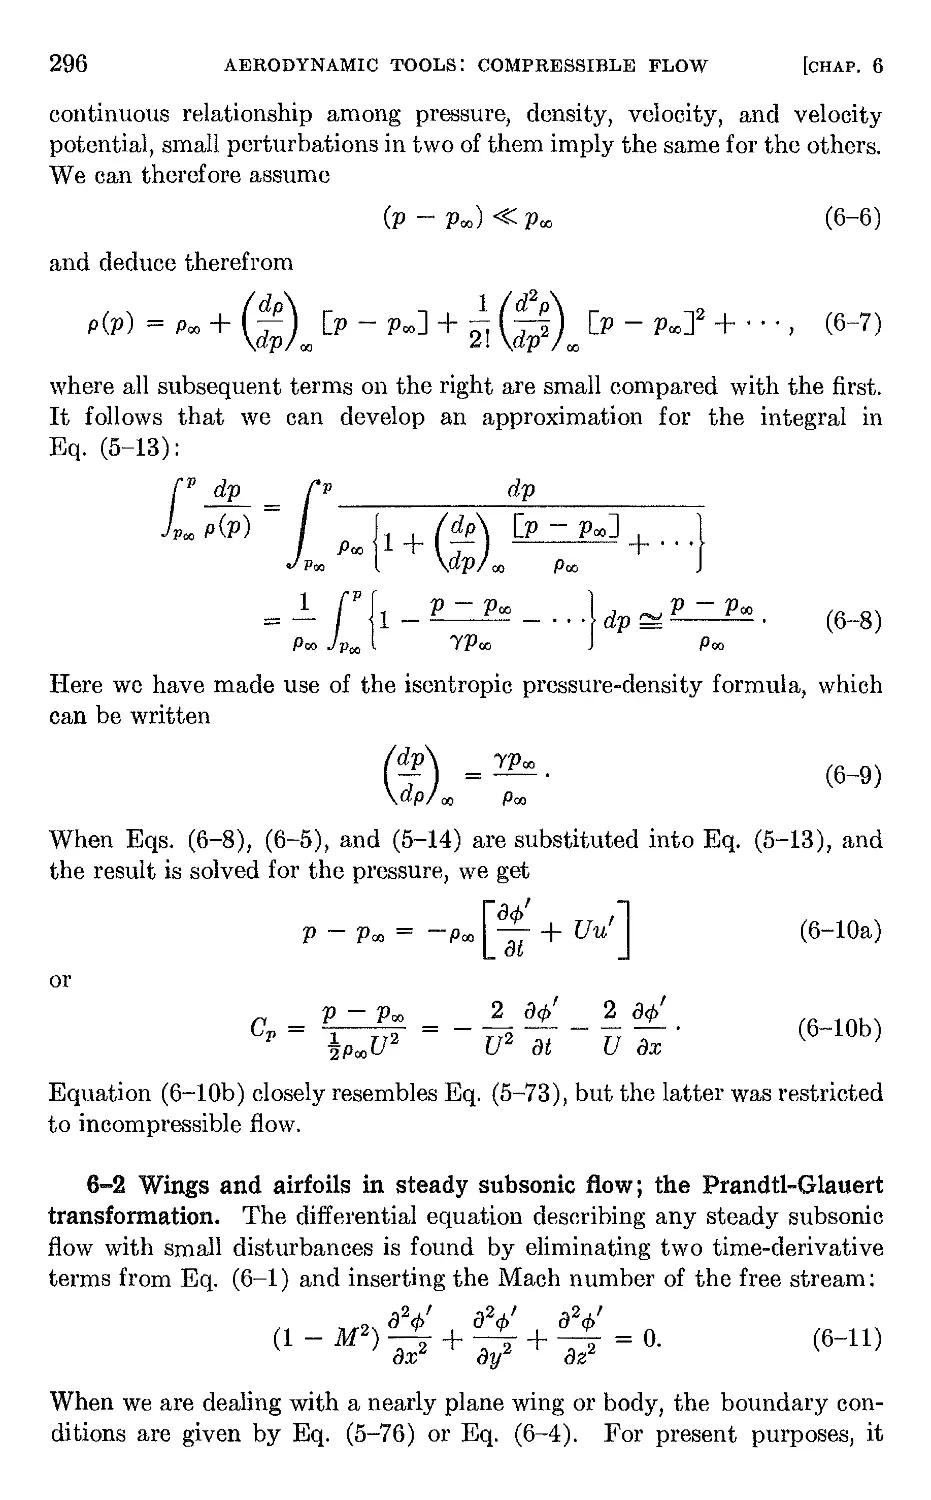 6.2 Wings and airfoils in steady subsonic flow; the Prandtl-Glauert transformation